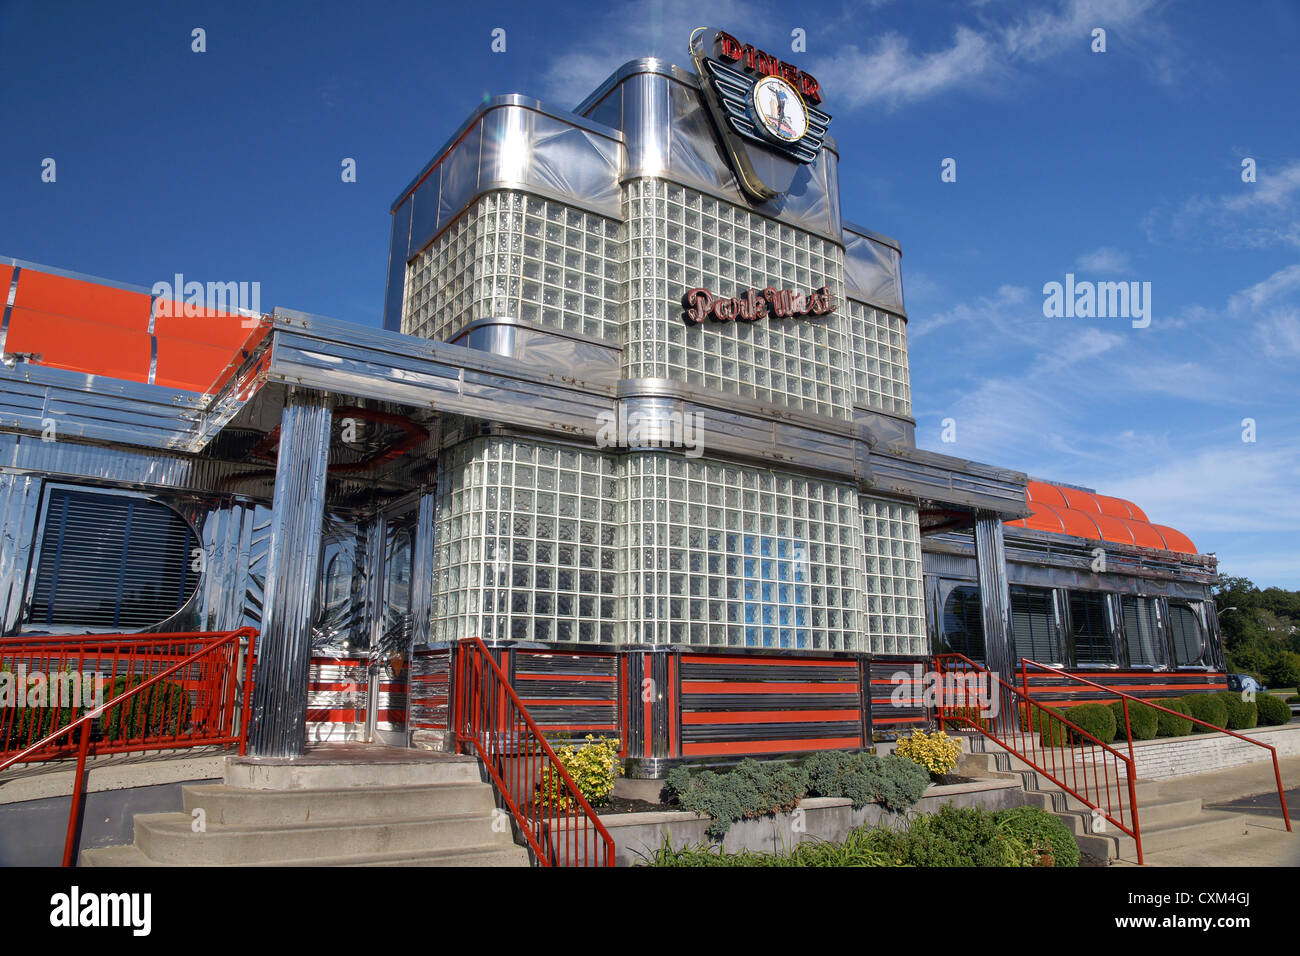 The iconic art deco style Park West diner a well known traditional American restaurant with its polished chrome and enamel metal Stock Photo